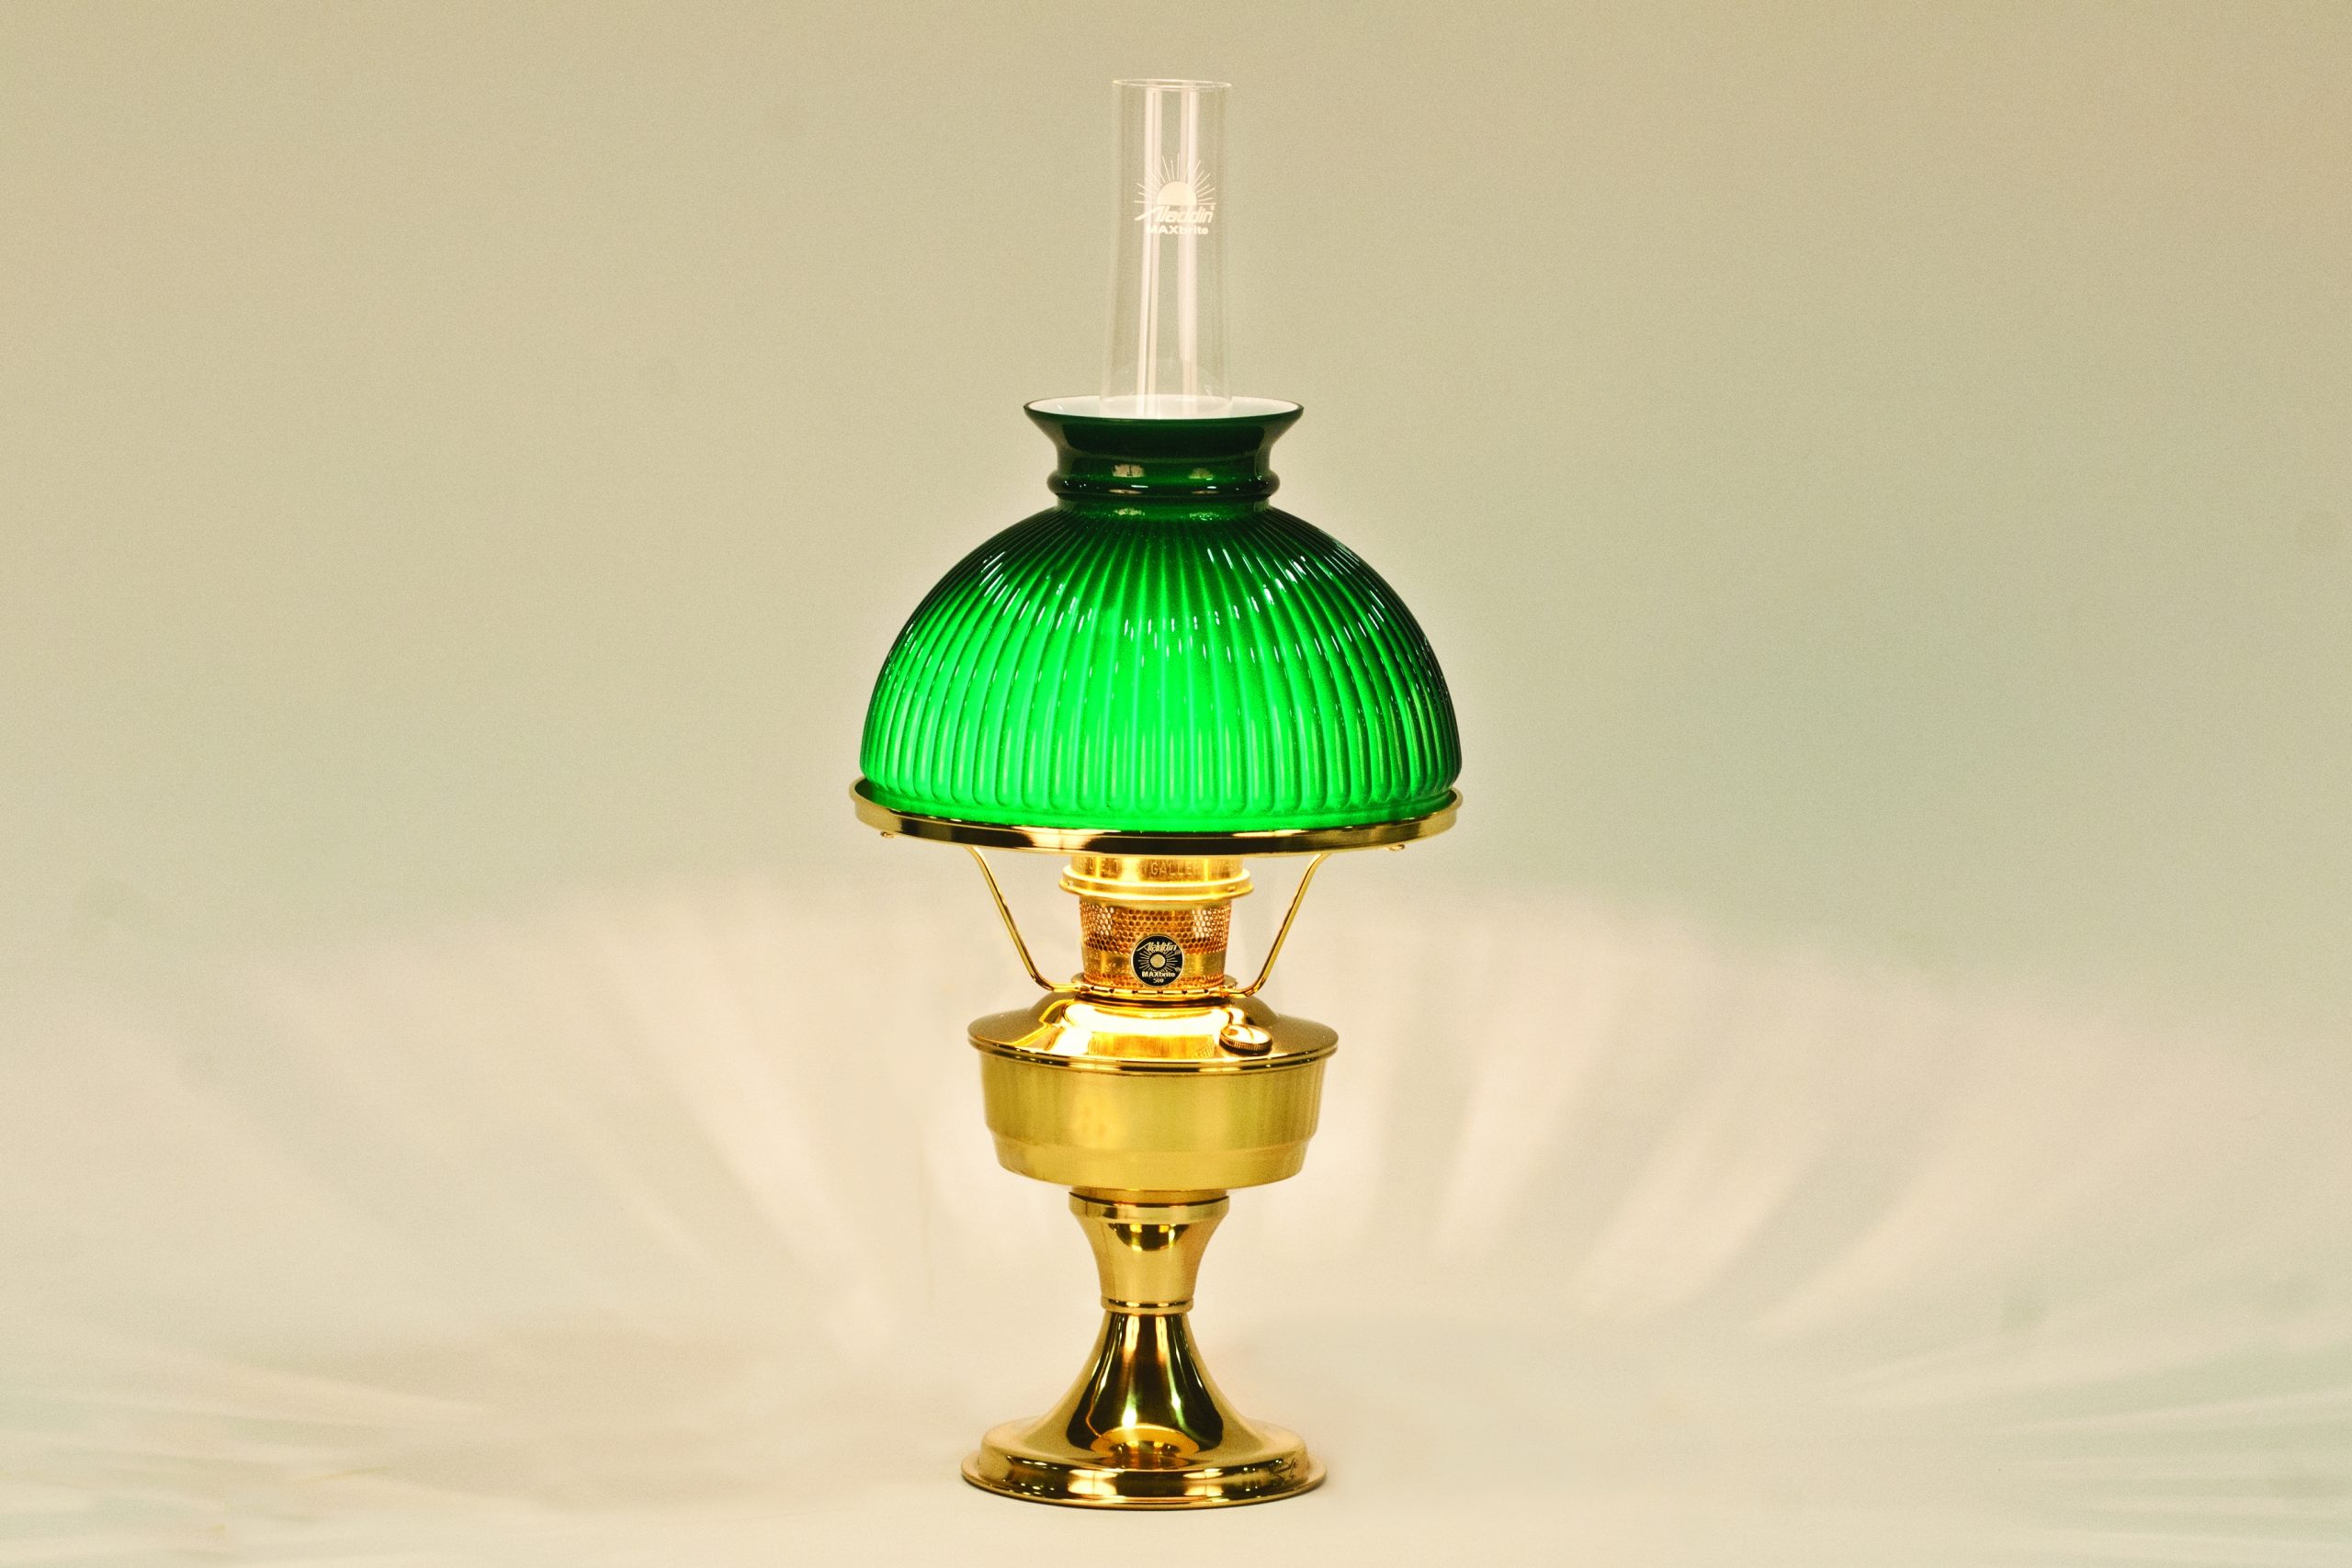 https://www.aladdinlamps.co/shop/wp-content/uploads/2016/09/100007456-All-Brass-Standard-Heritage-Table-Lamp-Green-Ribbed-10-in.-Glass-Shade-scaled.jpg